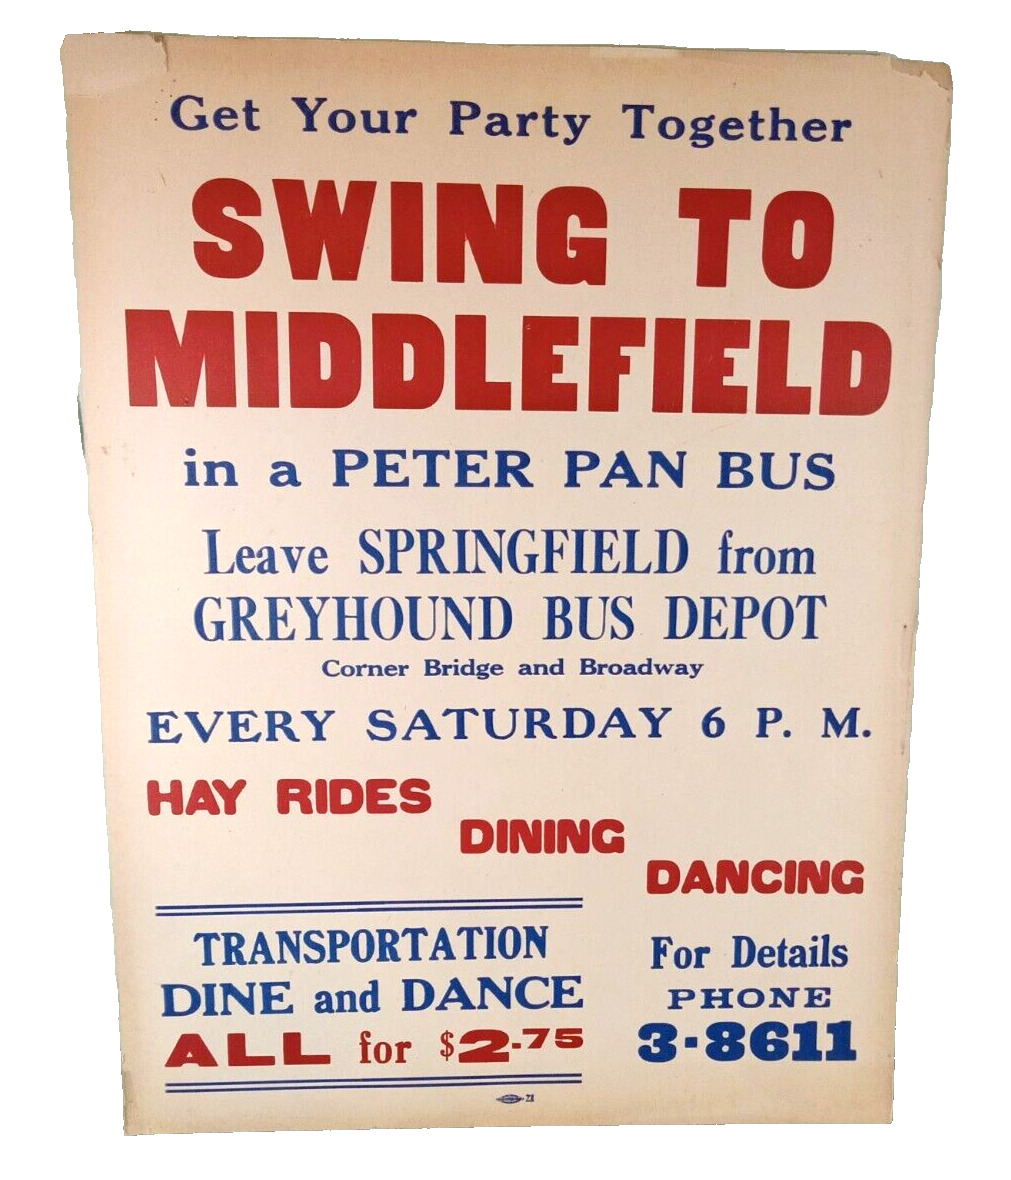 RARE Vintage Cardboard Poster SWING TO MIDDLEFIELD Peter Pan Bus Greyhound